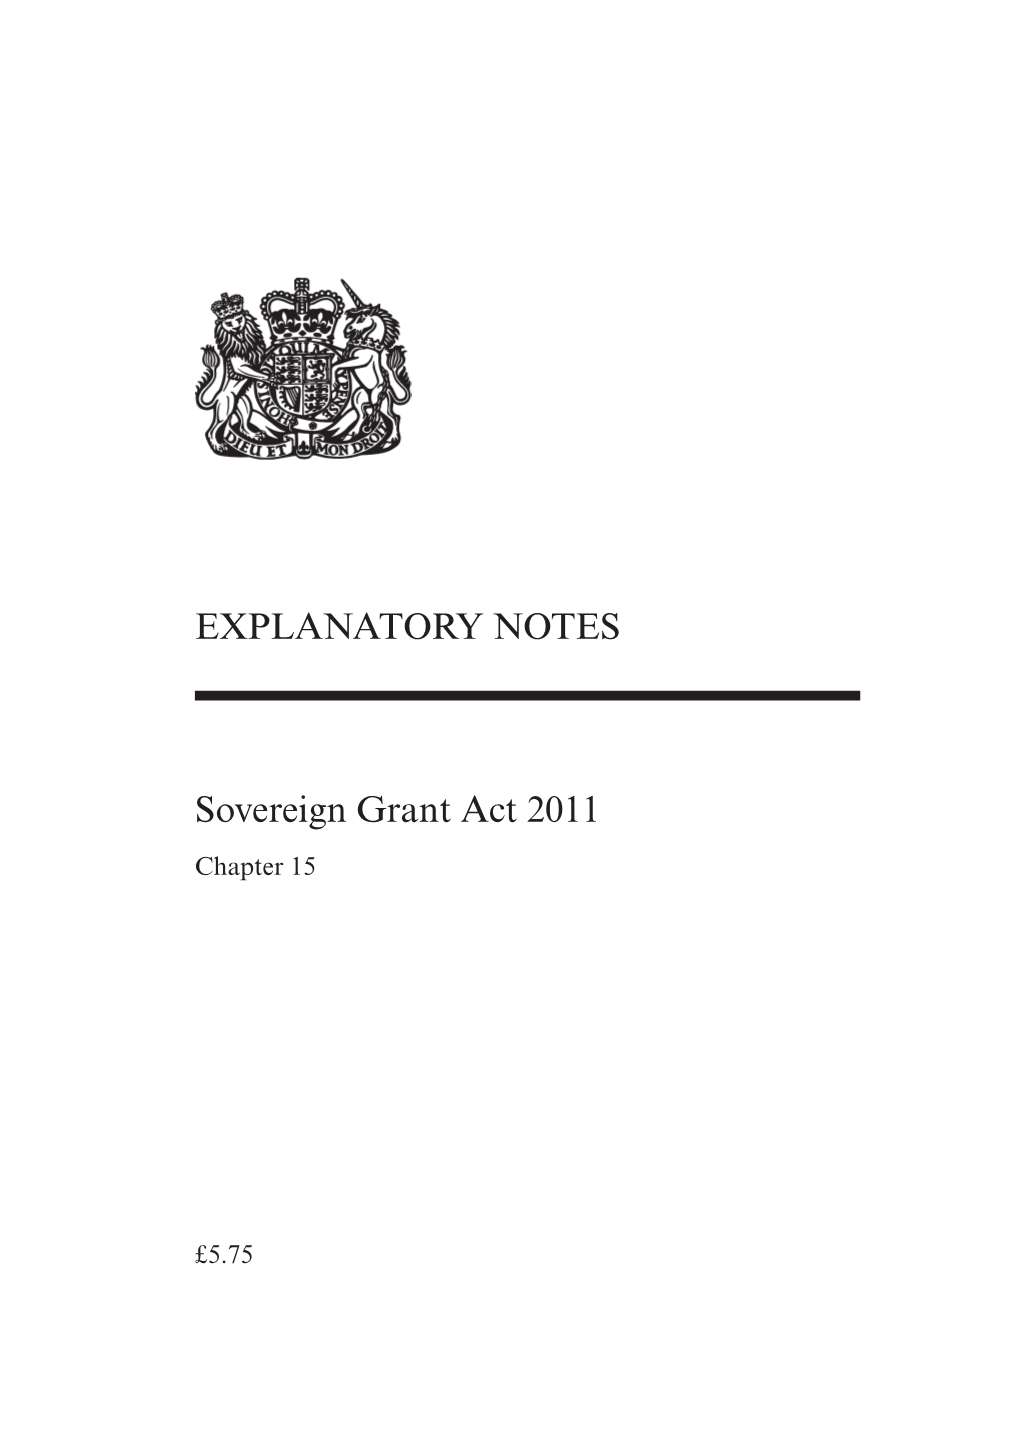 EXPLANATORY NOTES Sovereign Grant Act 2011